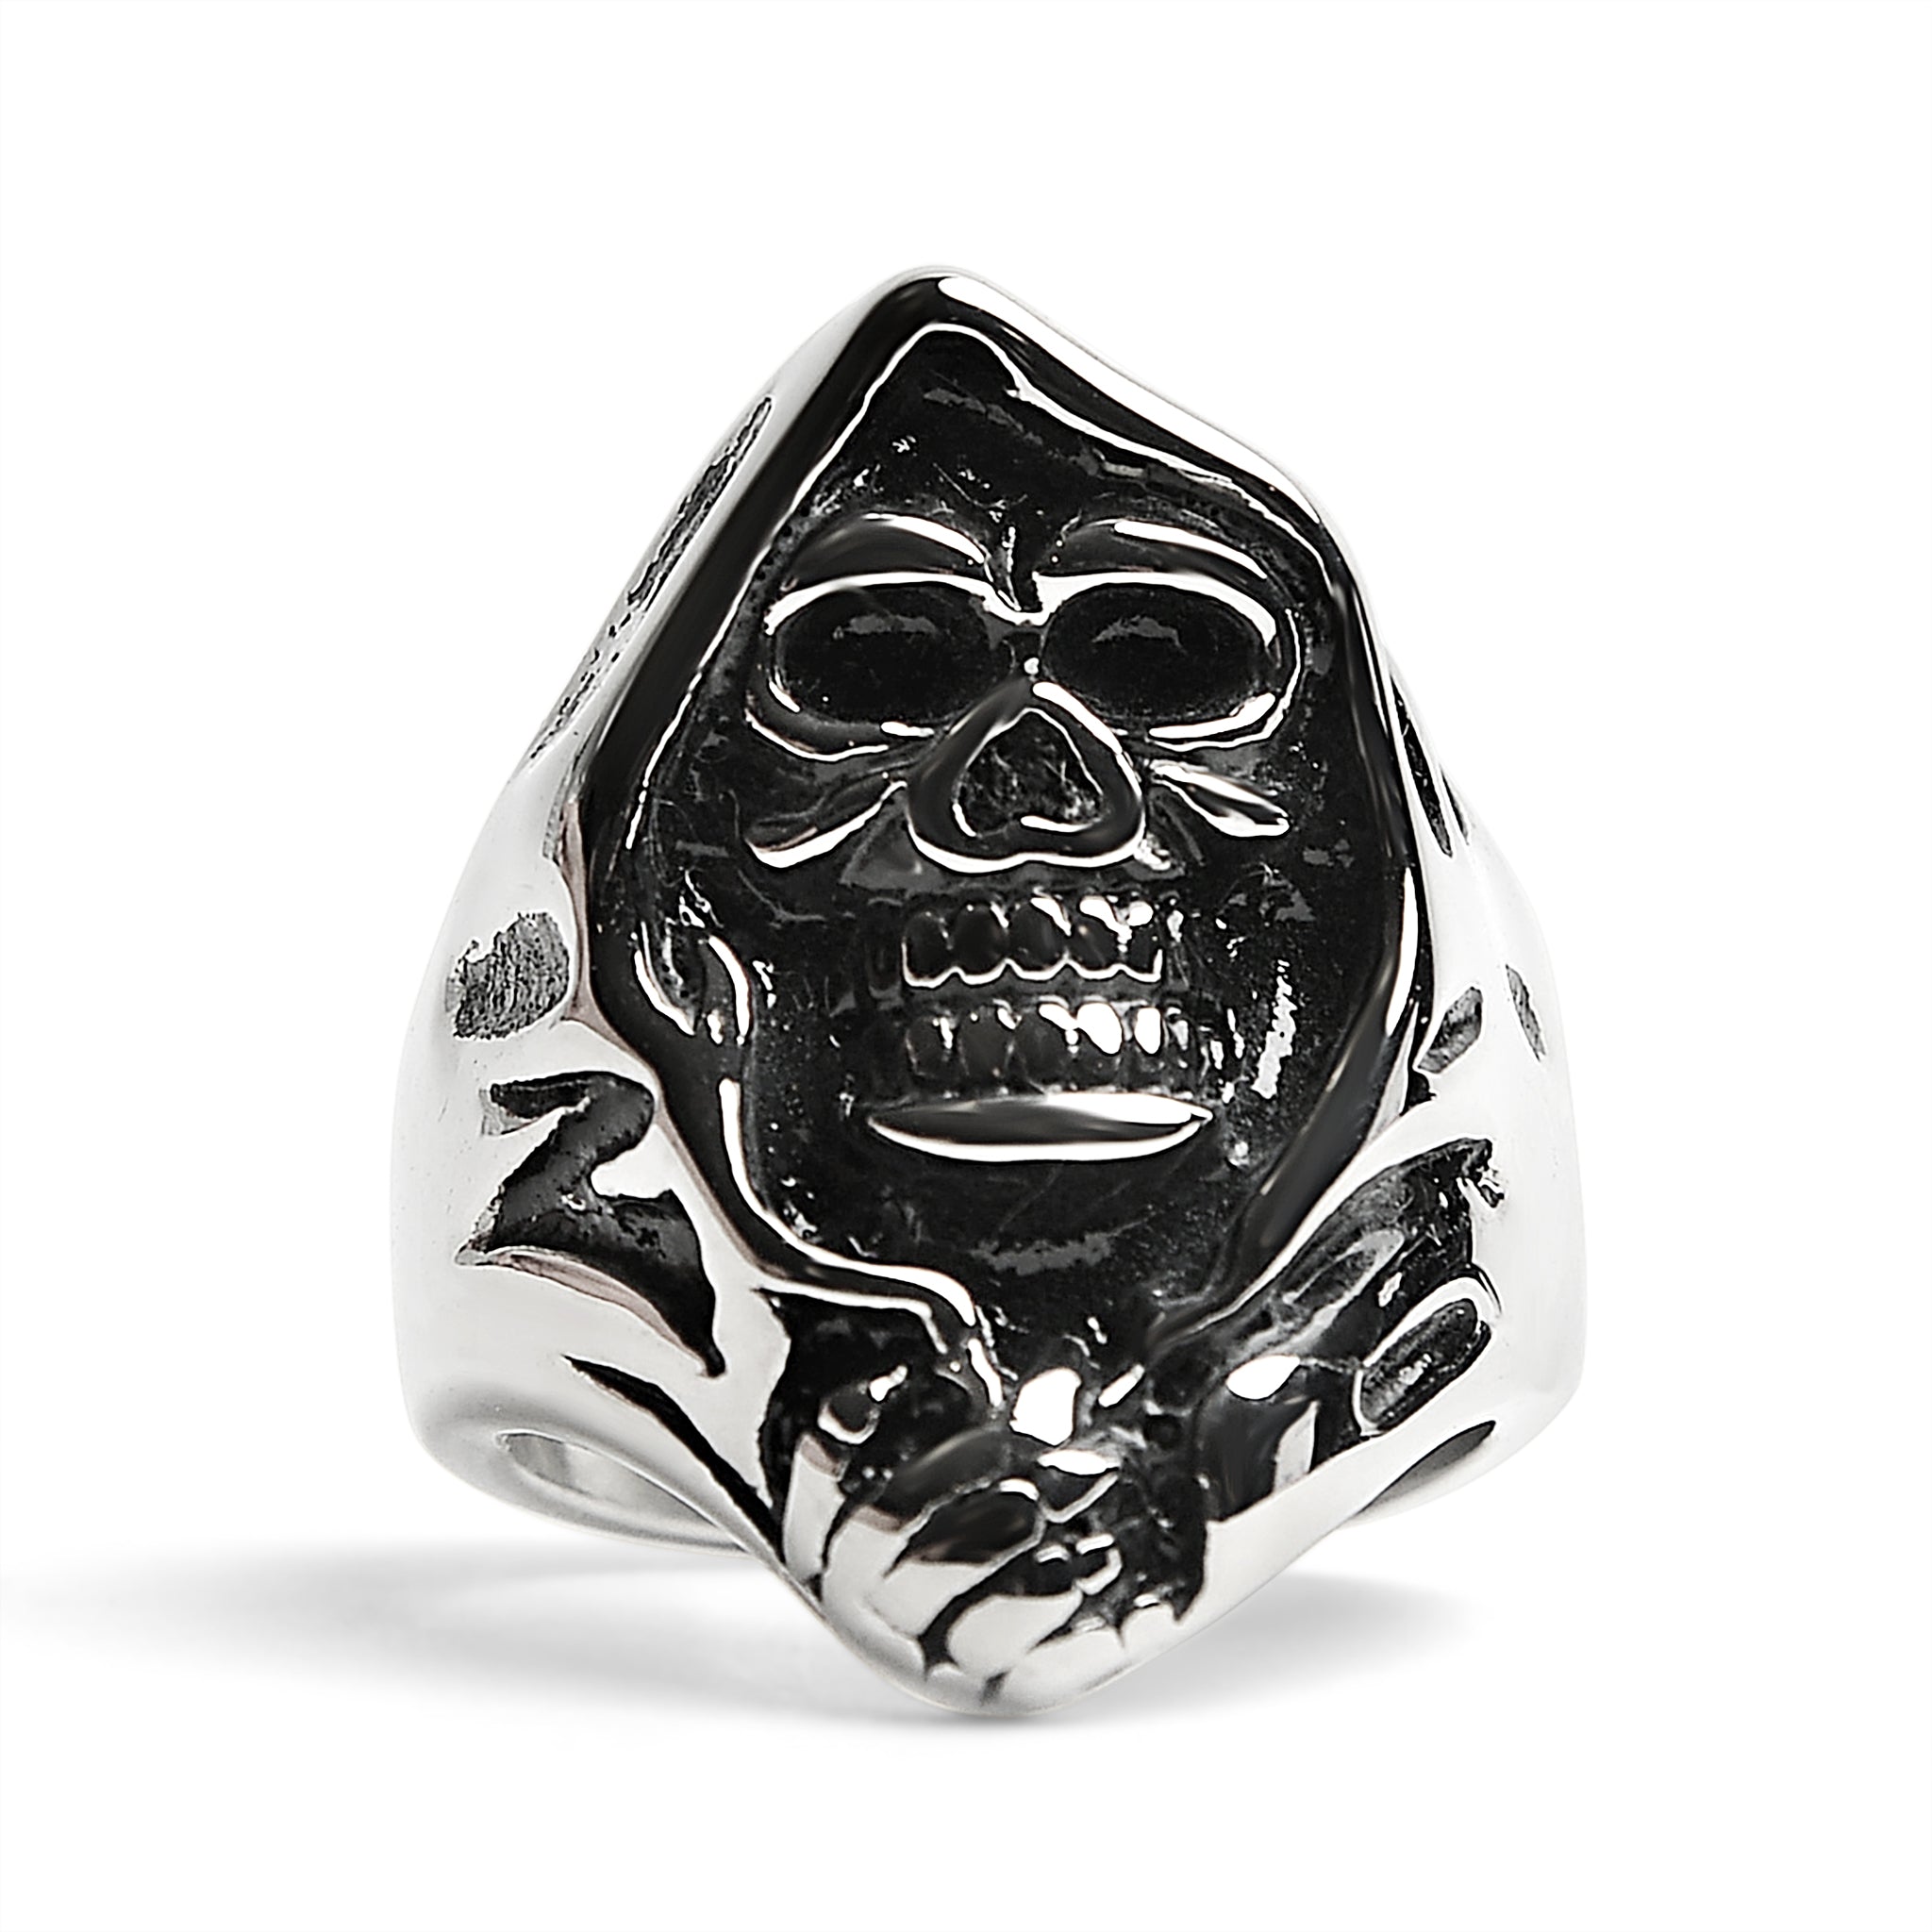 Stainless Steel Grim Reaper Skull Ring - Gothic-Chic Statement Piece for Men - Jewelry & Watches - Bijou Her -  -  - 